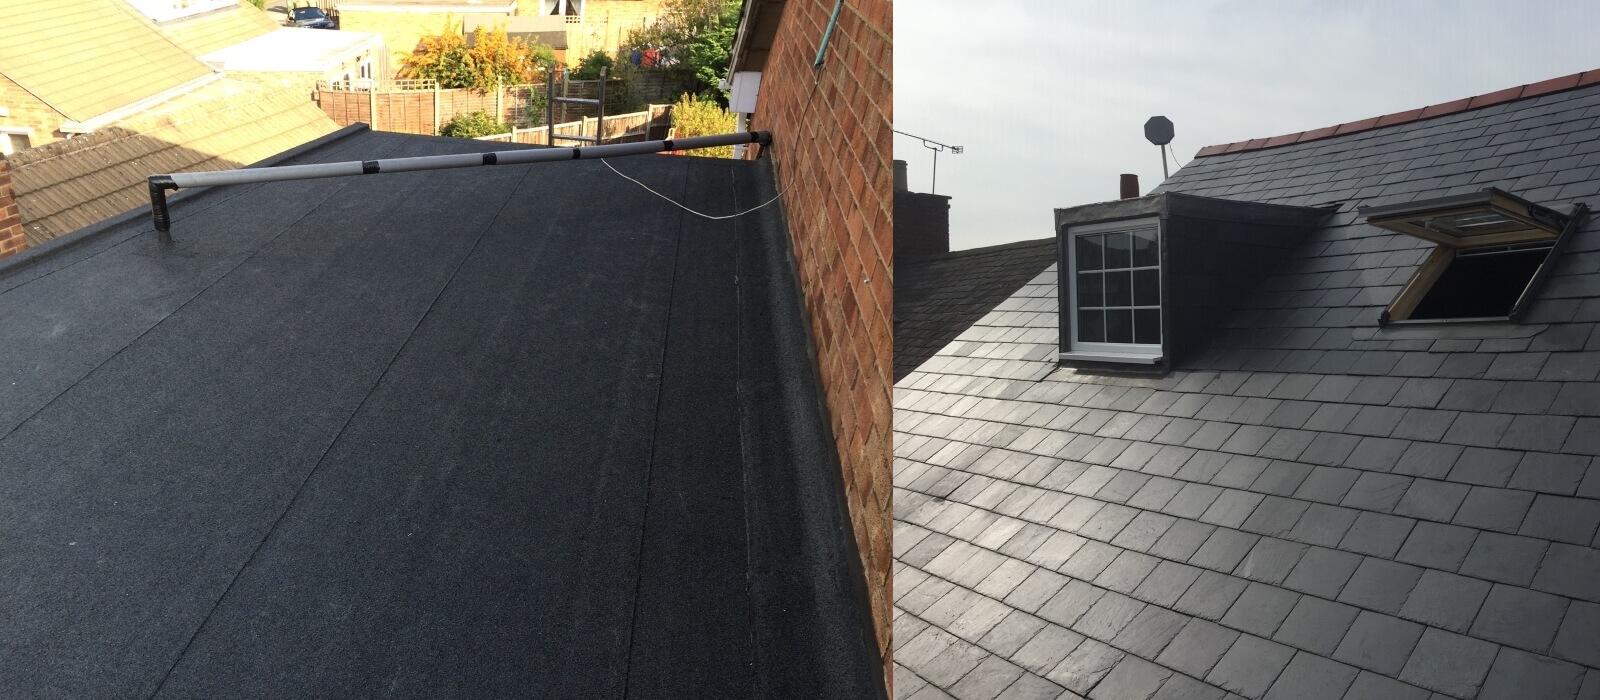 Chimney Replacement Leicester 360 Roofing